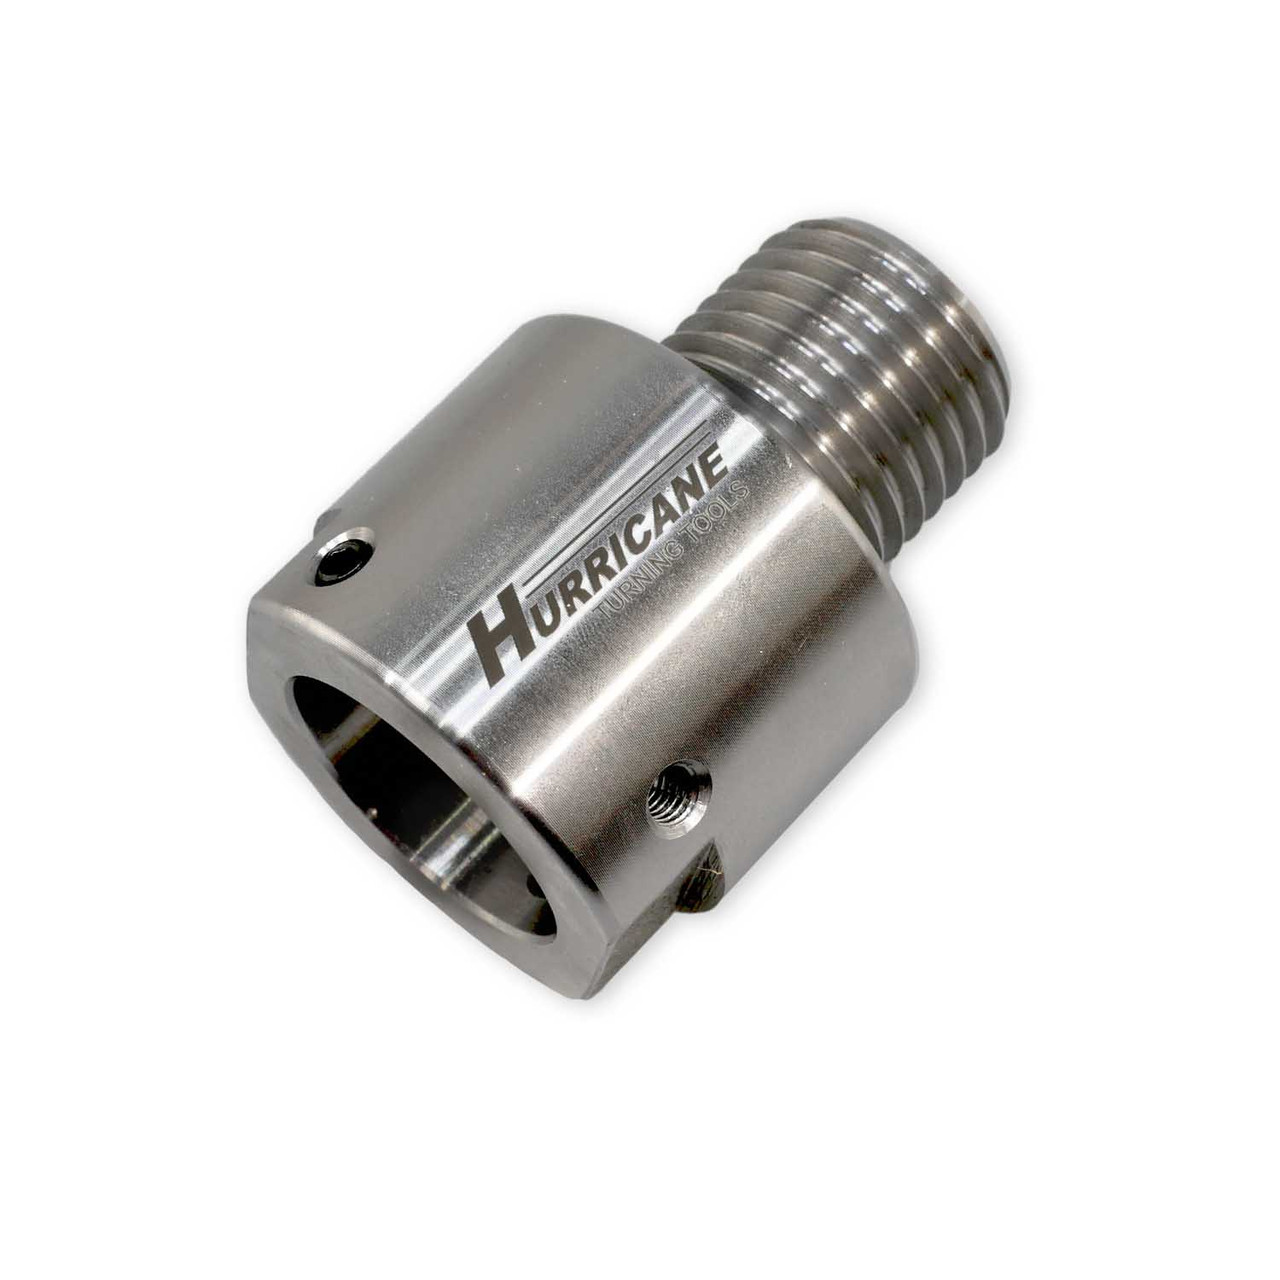 Hurricane, Headstock Spindle Adapter, 1.25" x 8 TPI External to M33 x 3.5mm Internal